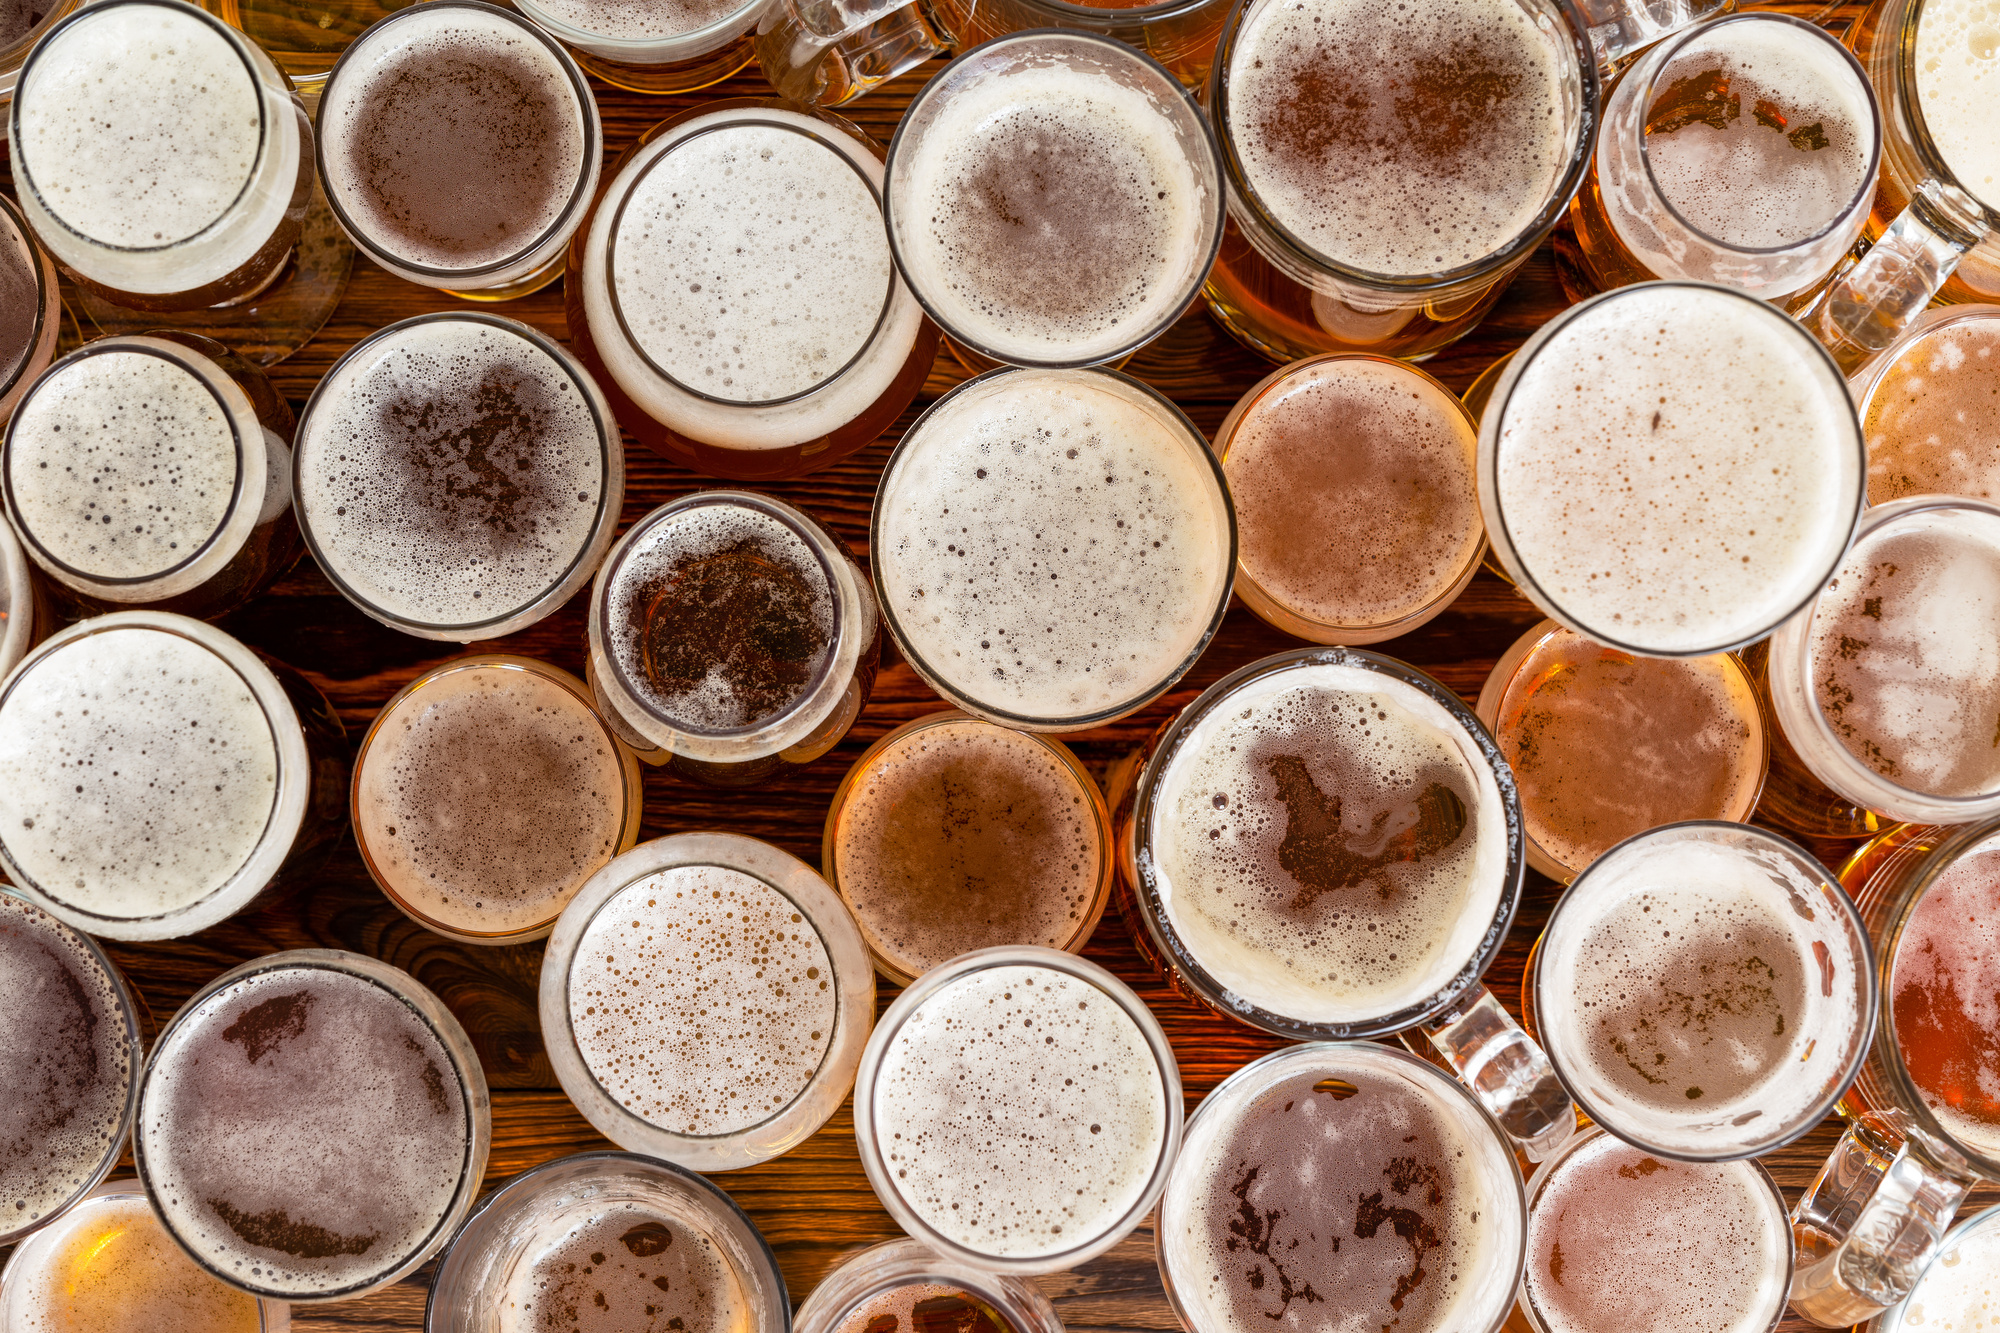 There are several different types of beer that people enjoy. You can learn more about these options by clicking right here.